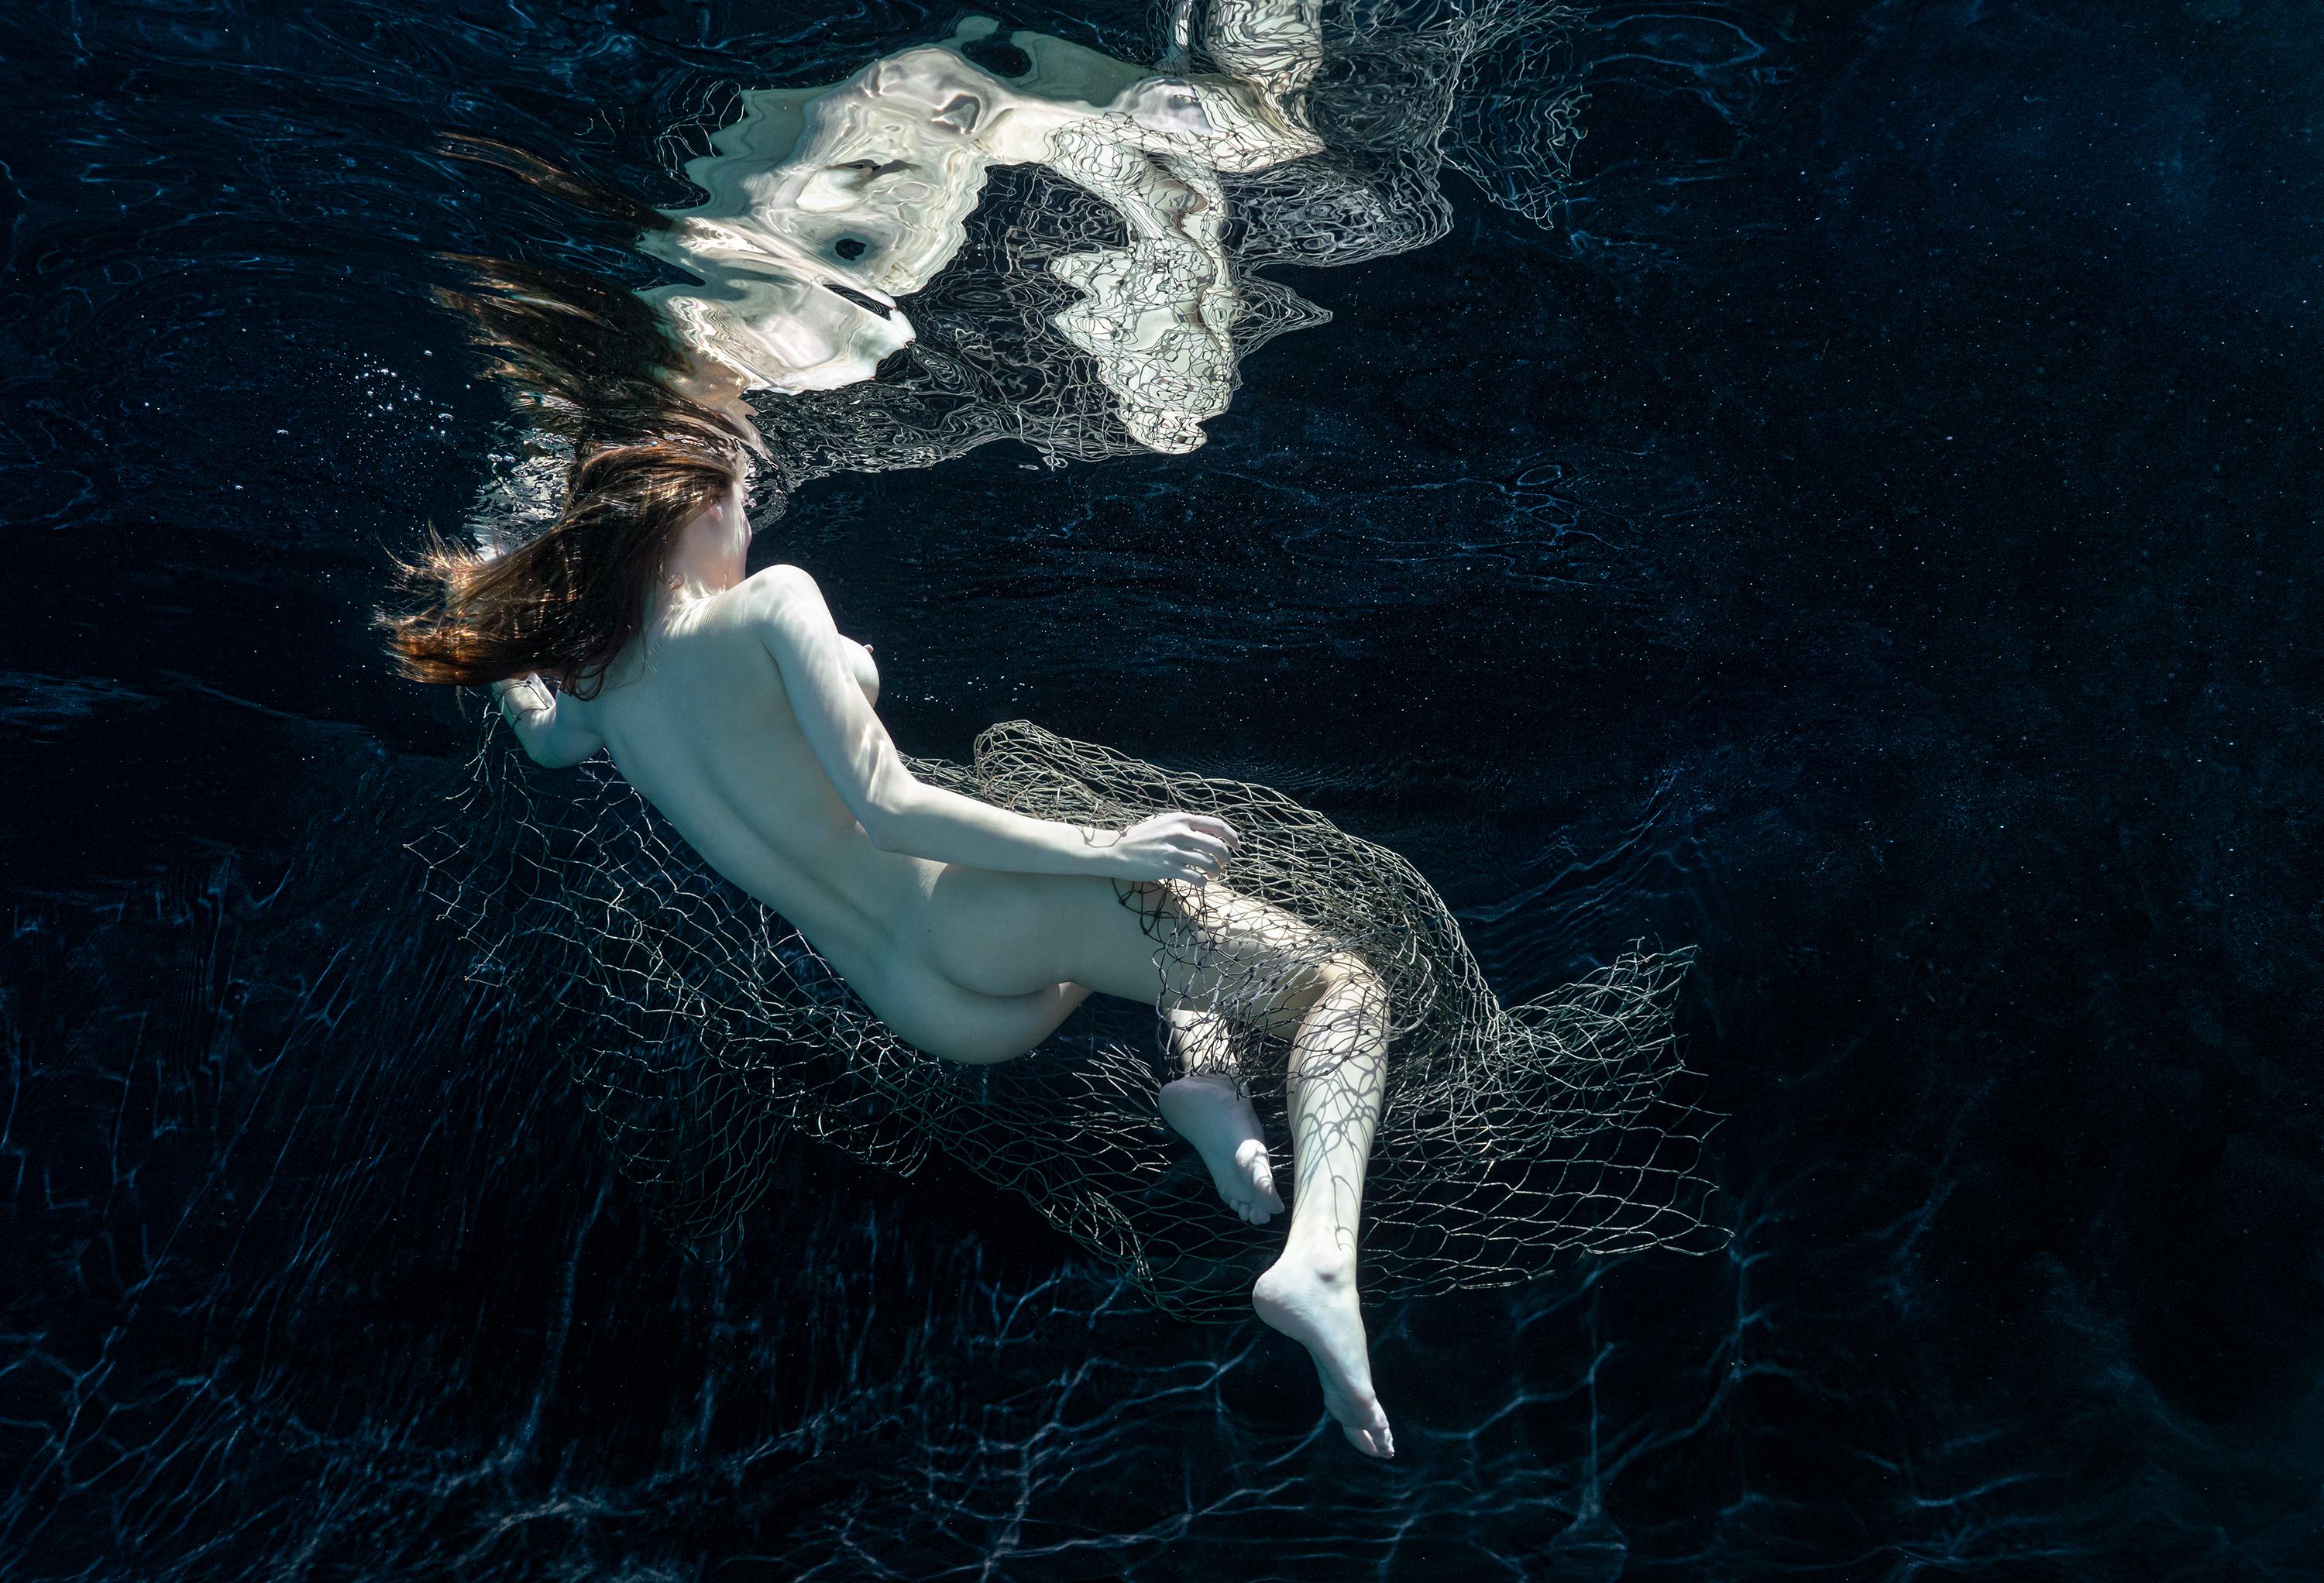 Alex Sher Black and White Photograph - Constellation - underwater nude photograph - archival pigment print 35" x 51"